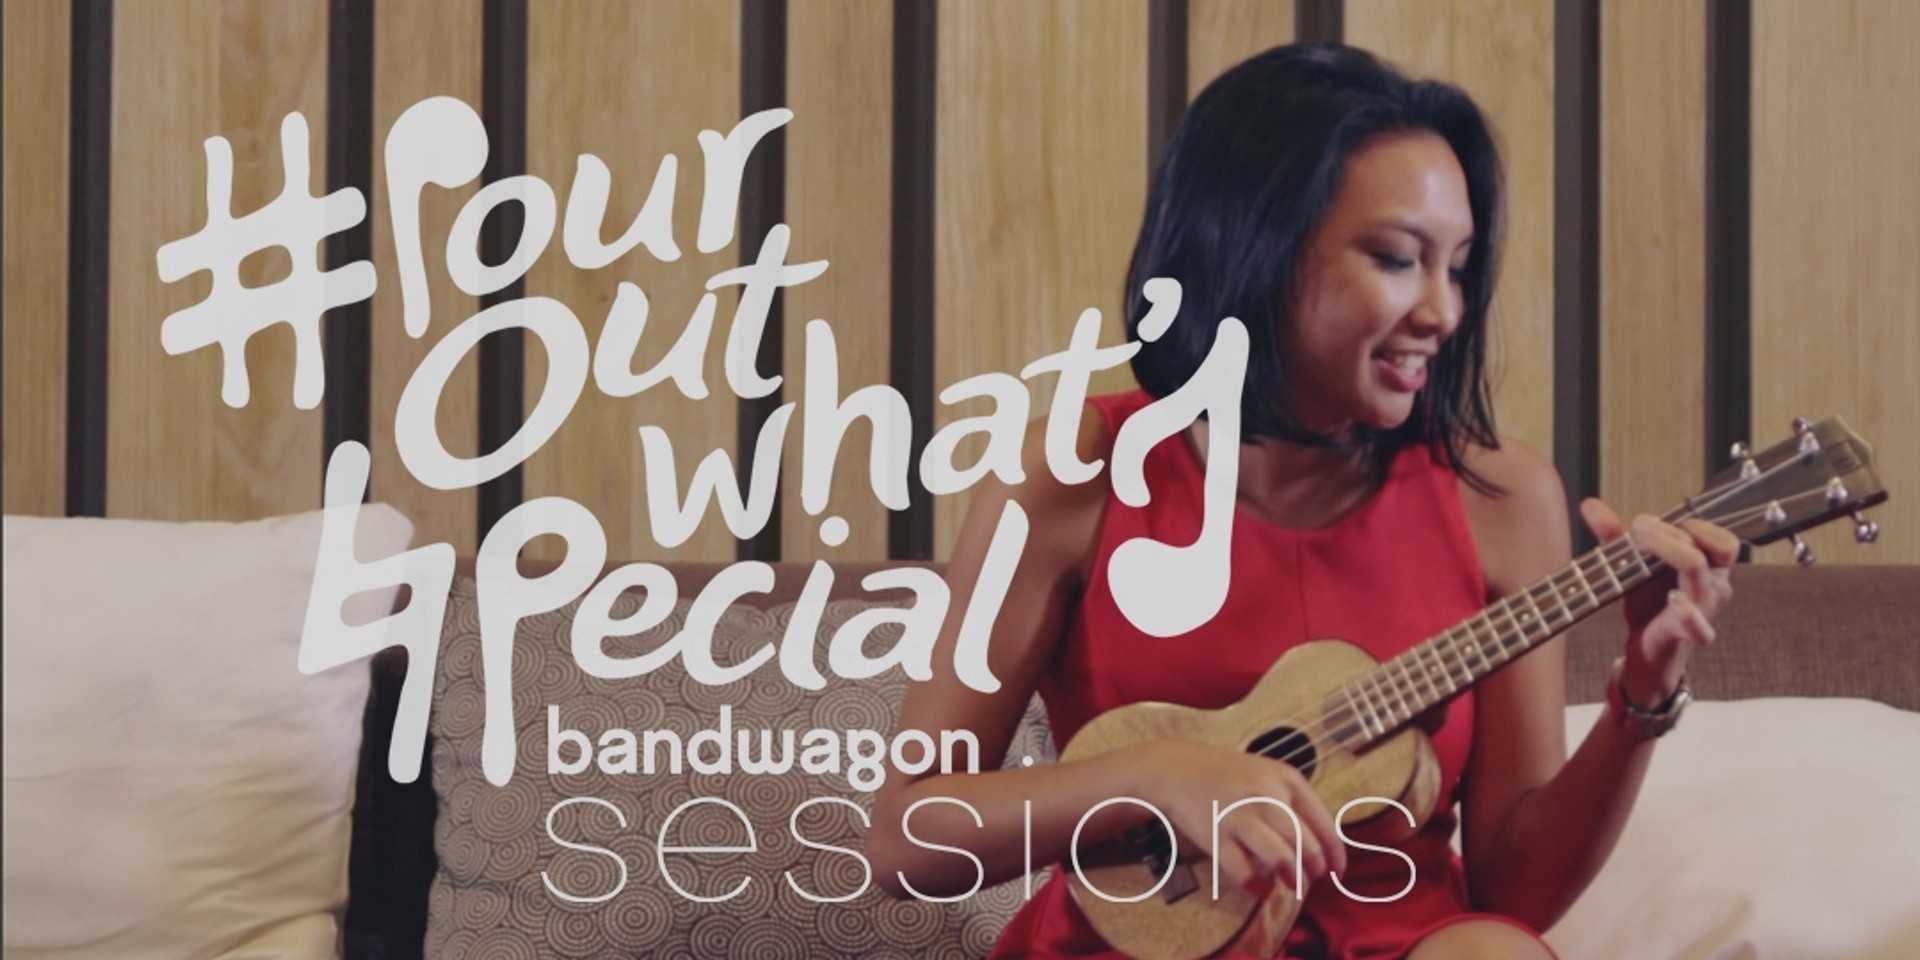 WATCH: The Ransom Collective's Leah Halili performs "Lost Girl" in our first episode of Pour Out What's Special x Bandwagon Sessions